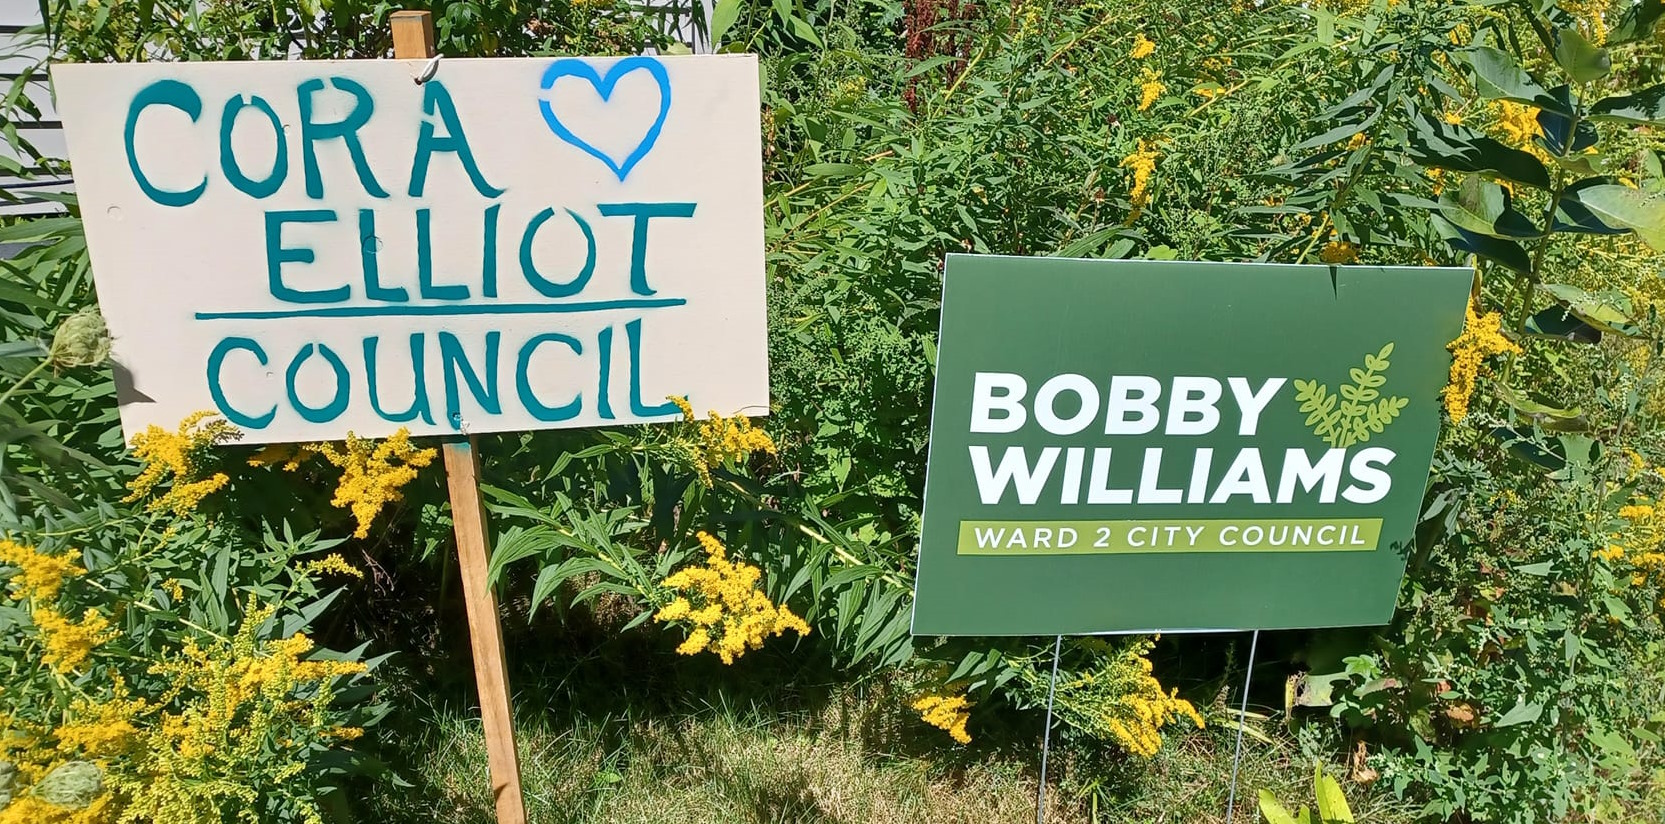 Political signs that say Cora Elliot Council and Bobby Williams Ward 2 City Council